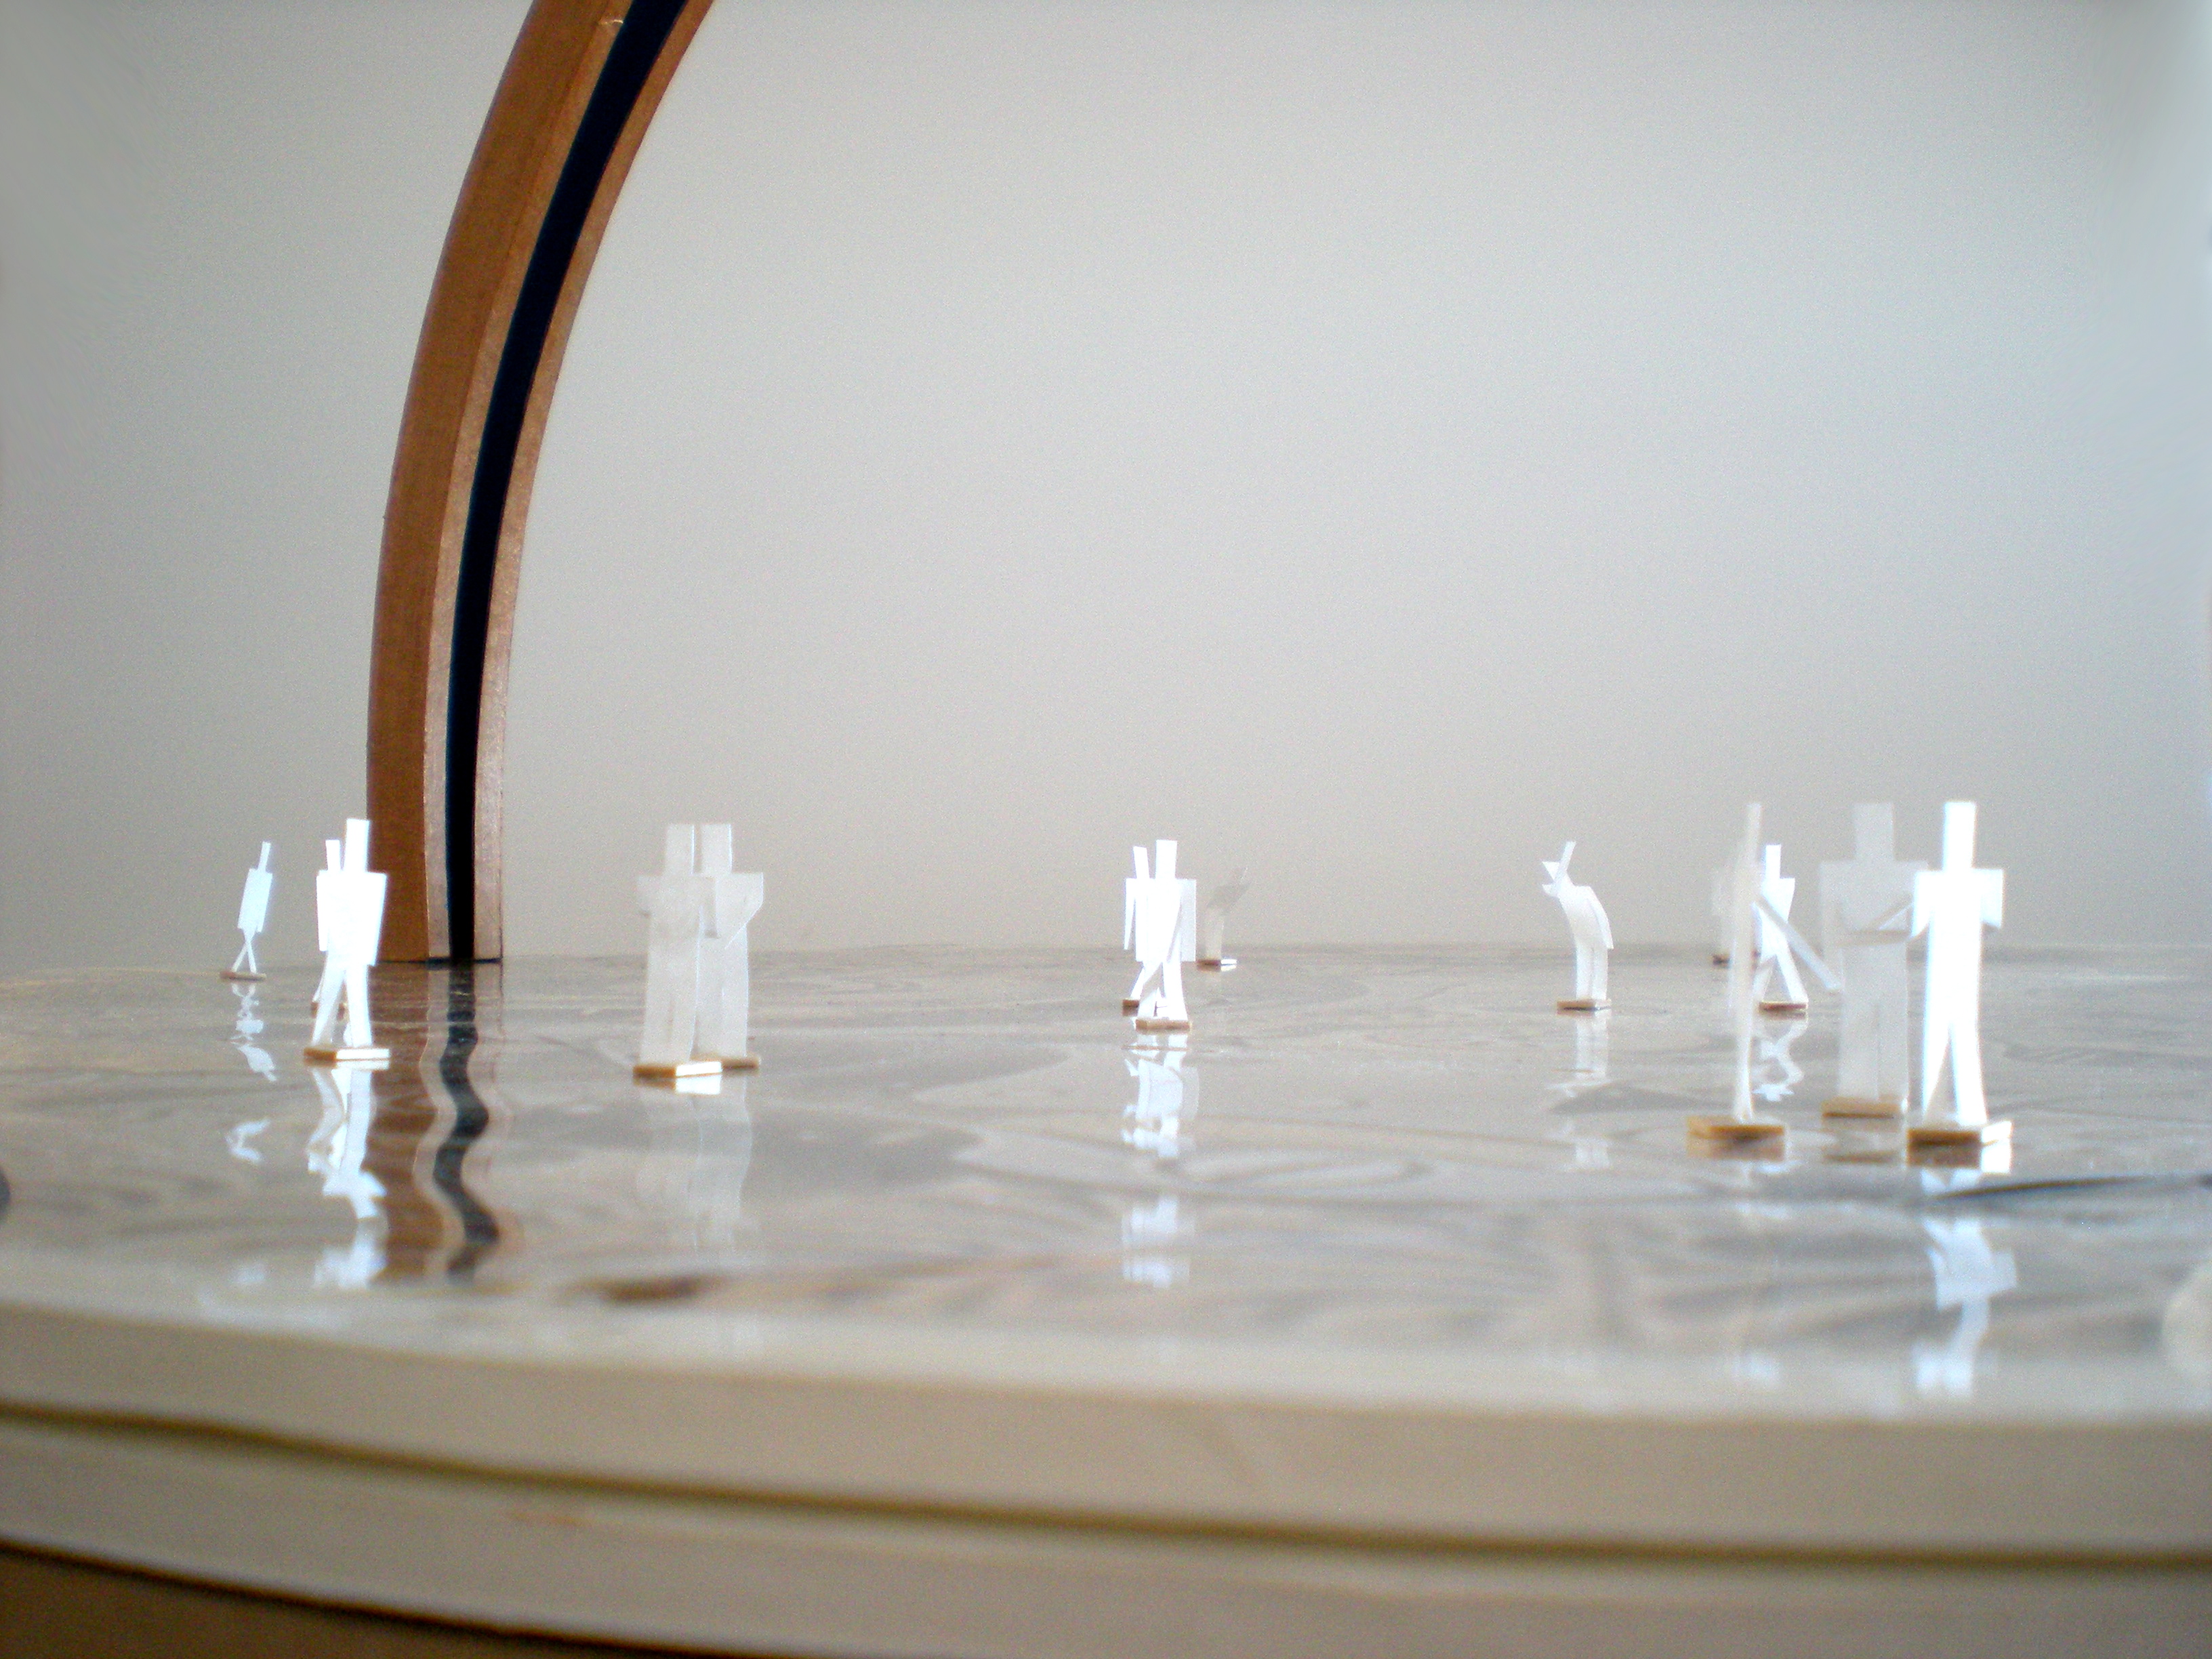 a close-up of the model taken at ground-level, showing the paper people walking around on the plaza